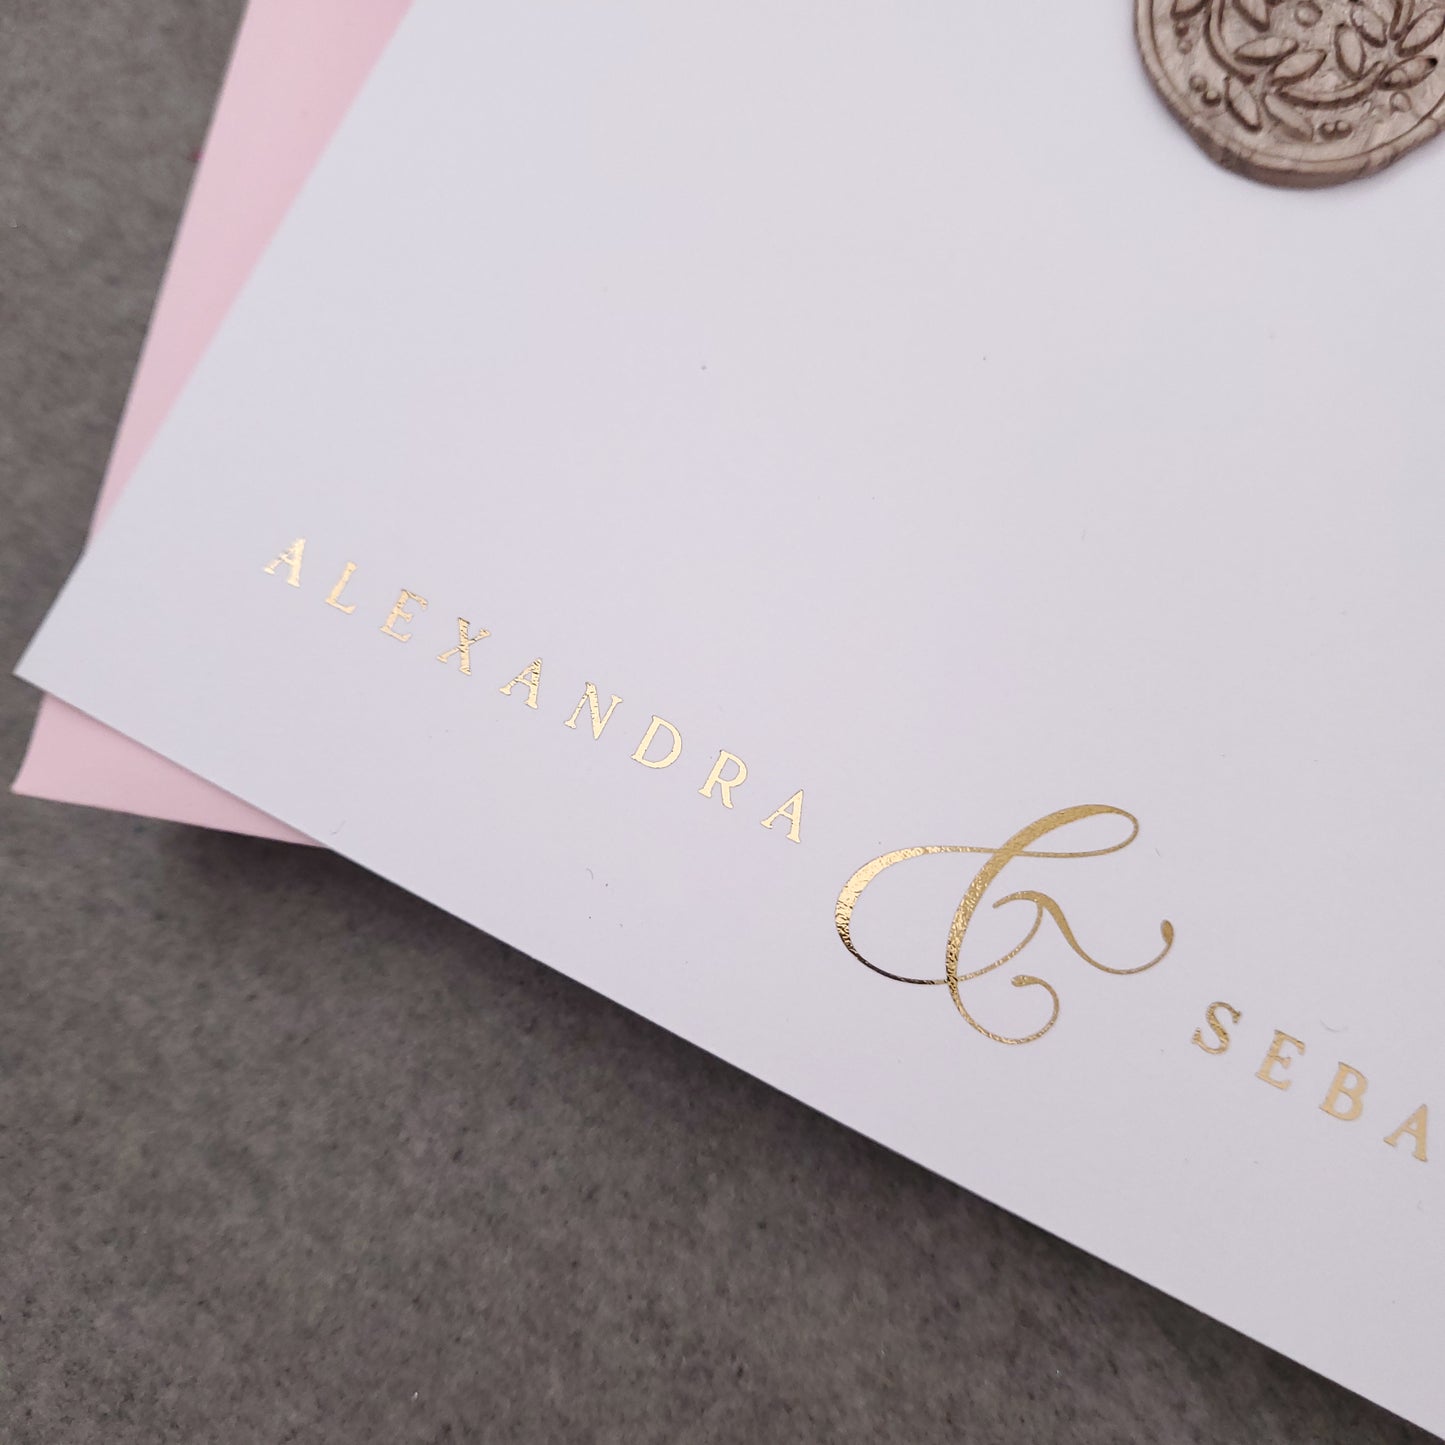 custom flat wedding stationery cards with gold foiled lettering- XOXOKristen